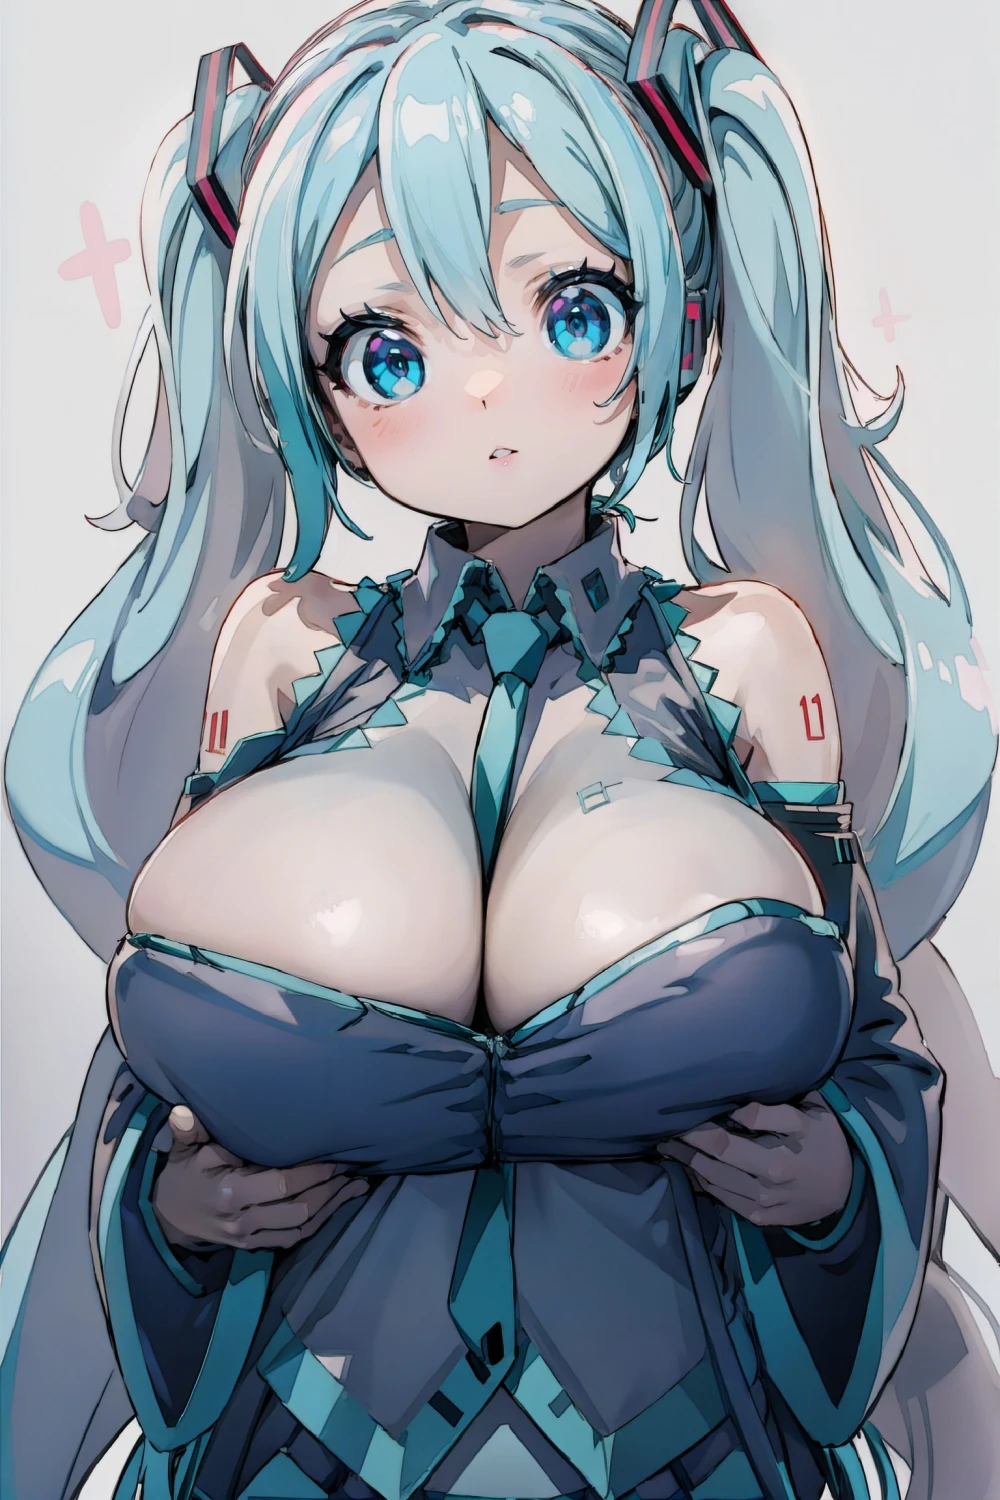 hatsune-miku-anime-style-all-ages-2-42